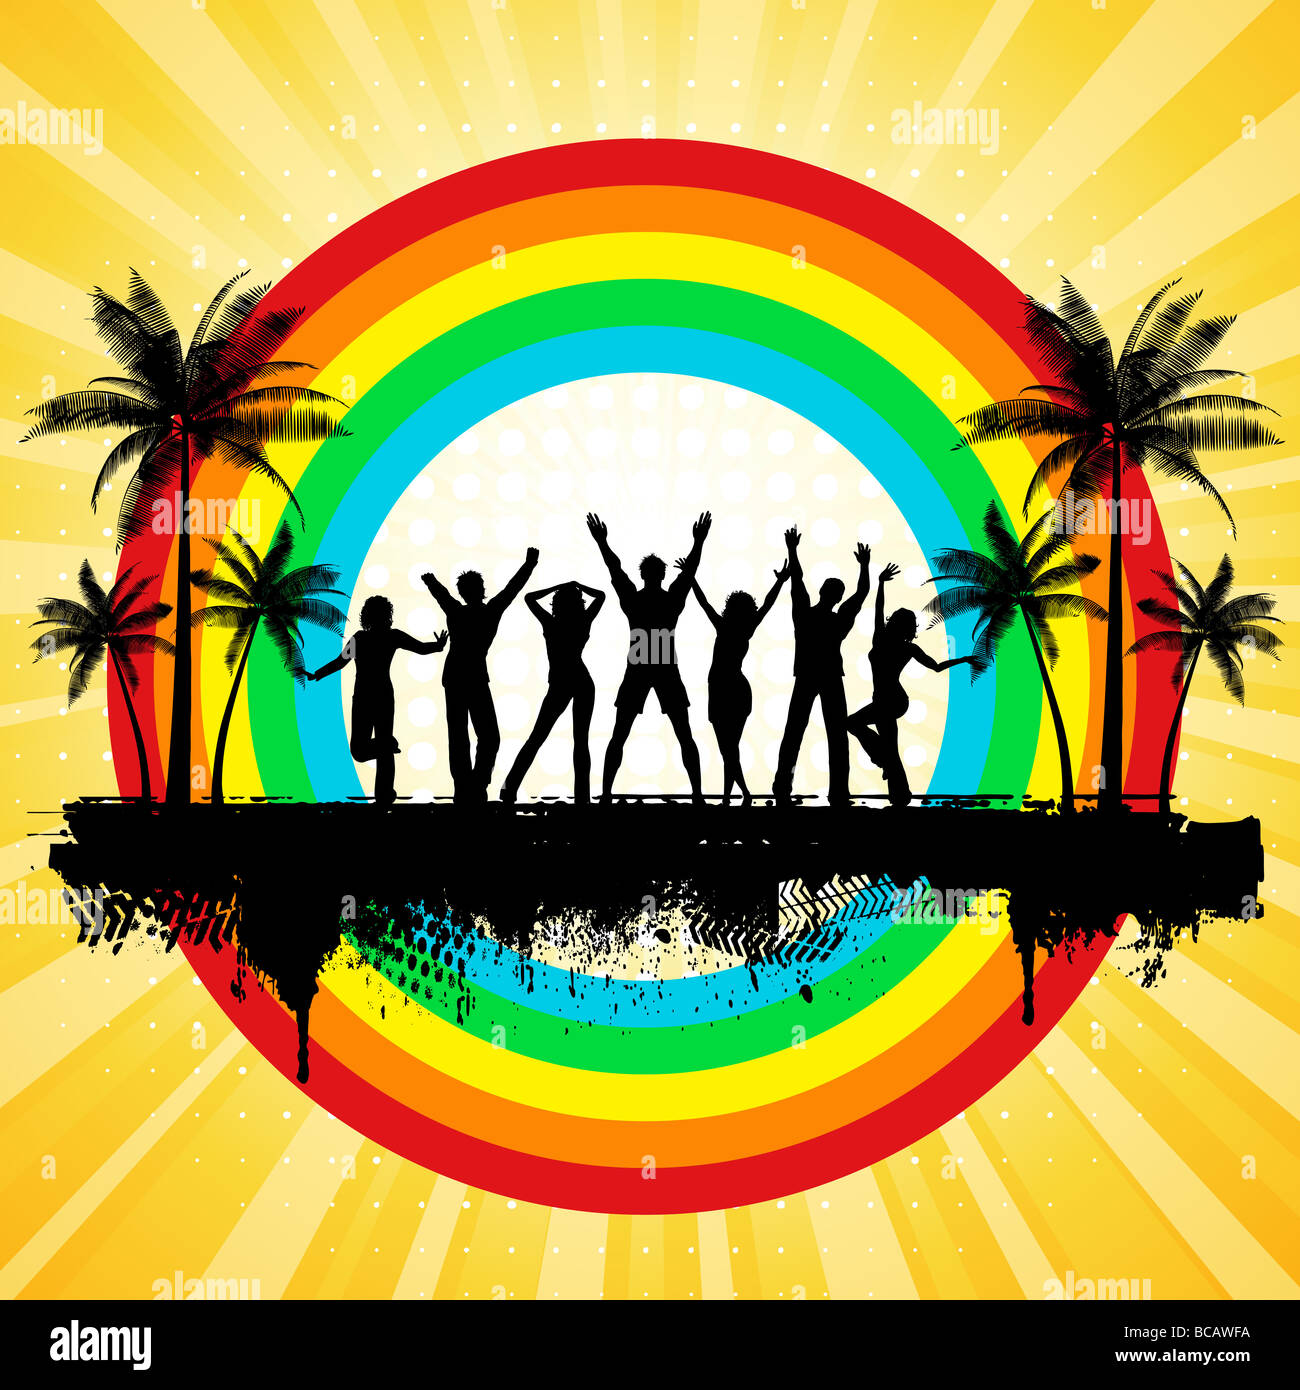 Silhouettes of people dancing on a grunge summer background Stock Photo